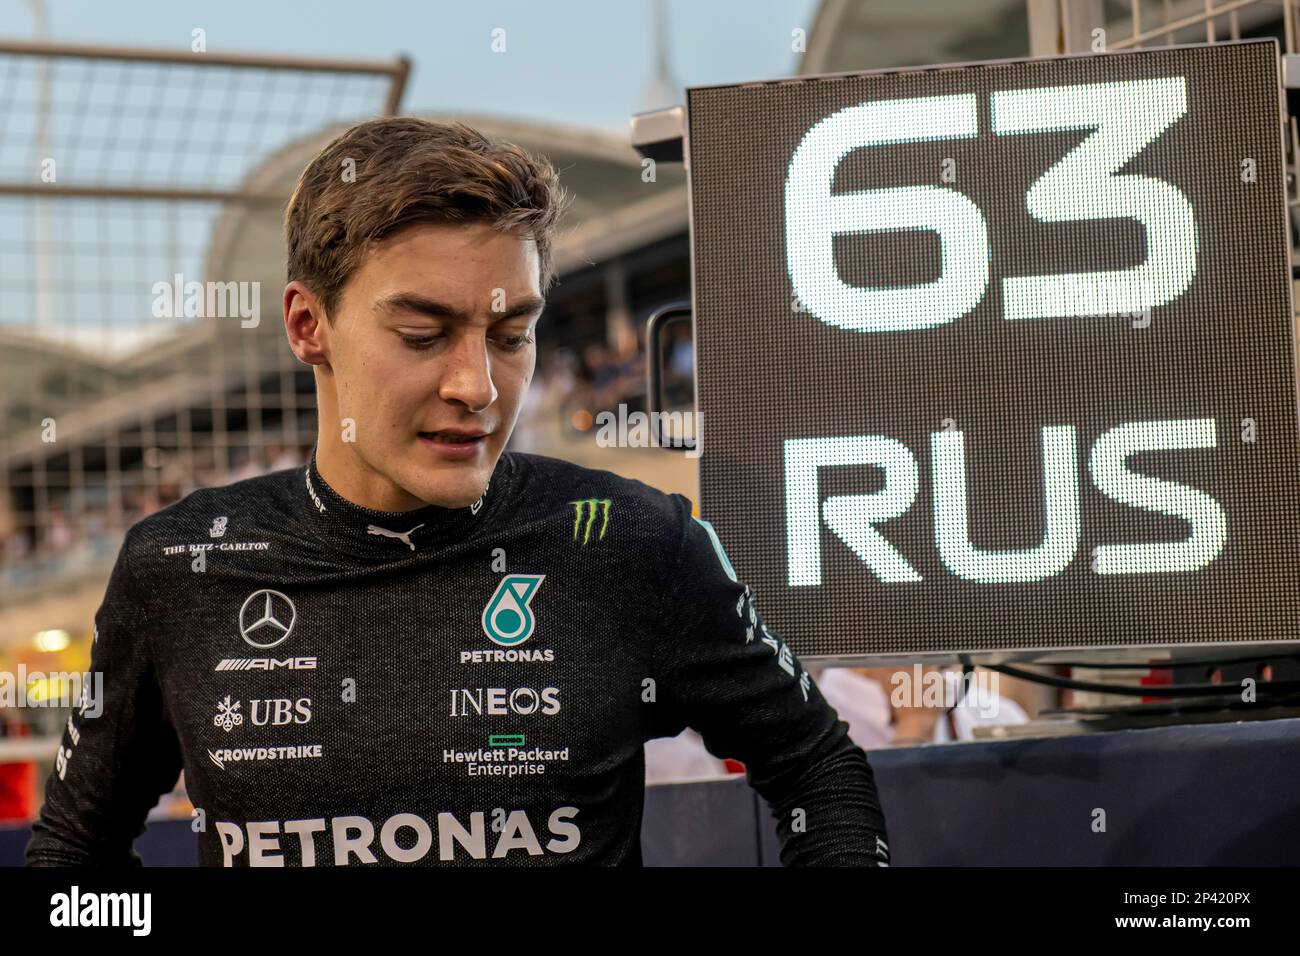 Sakhir, Bahrain, March 05, George Russell, from the United Kingdom competes for Mercedes F1. Race day, round 1 of the 2023 Formula 1 championship. Credit: Michael Potts/Alamy Live News Stock Photo